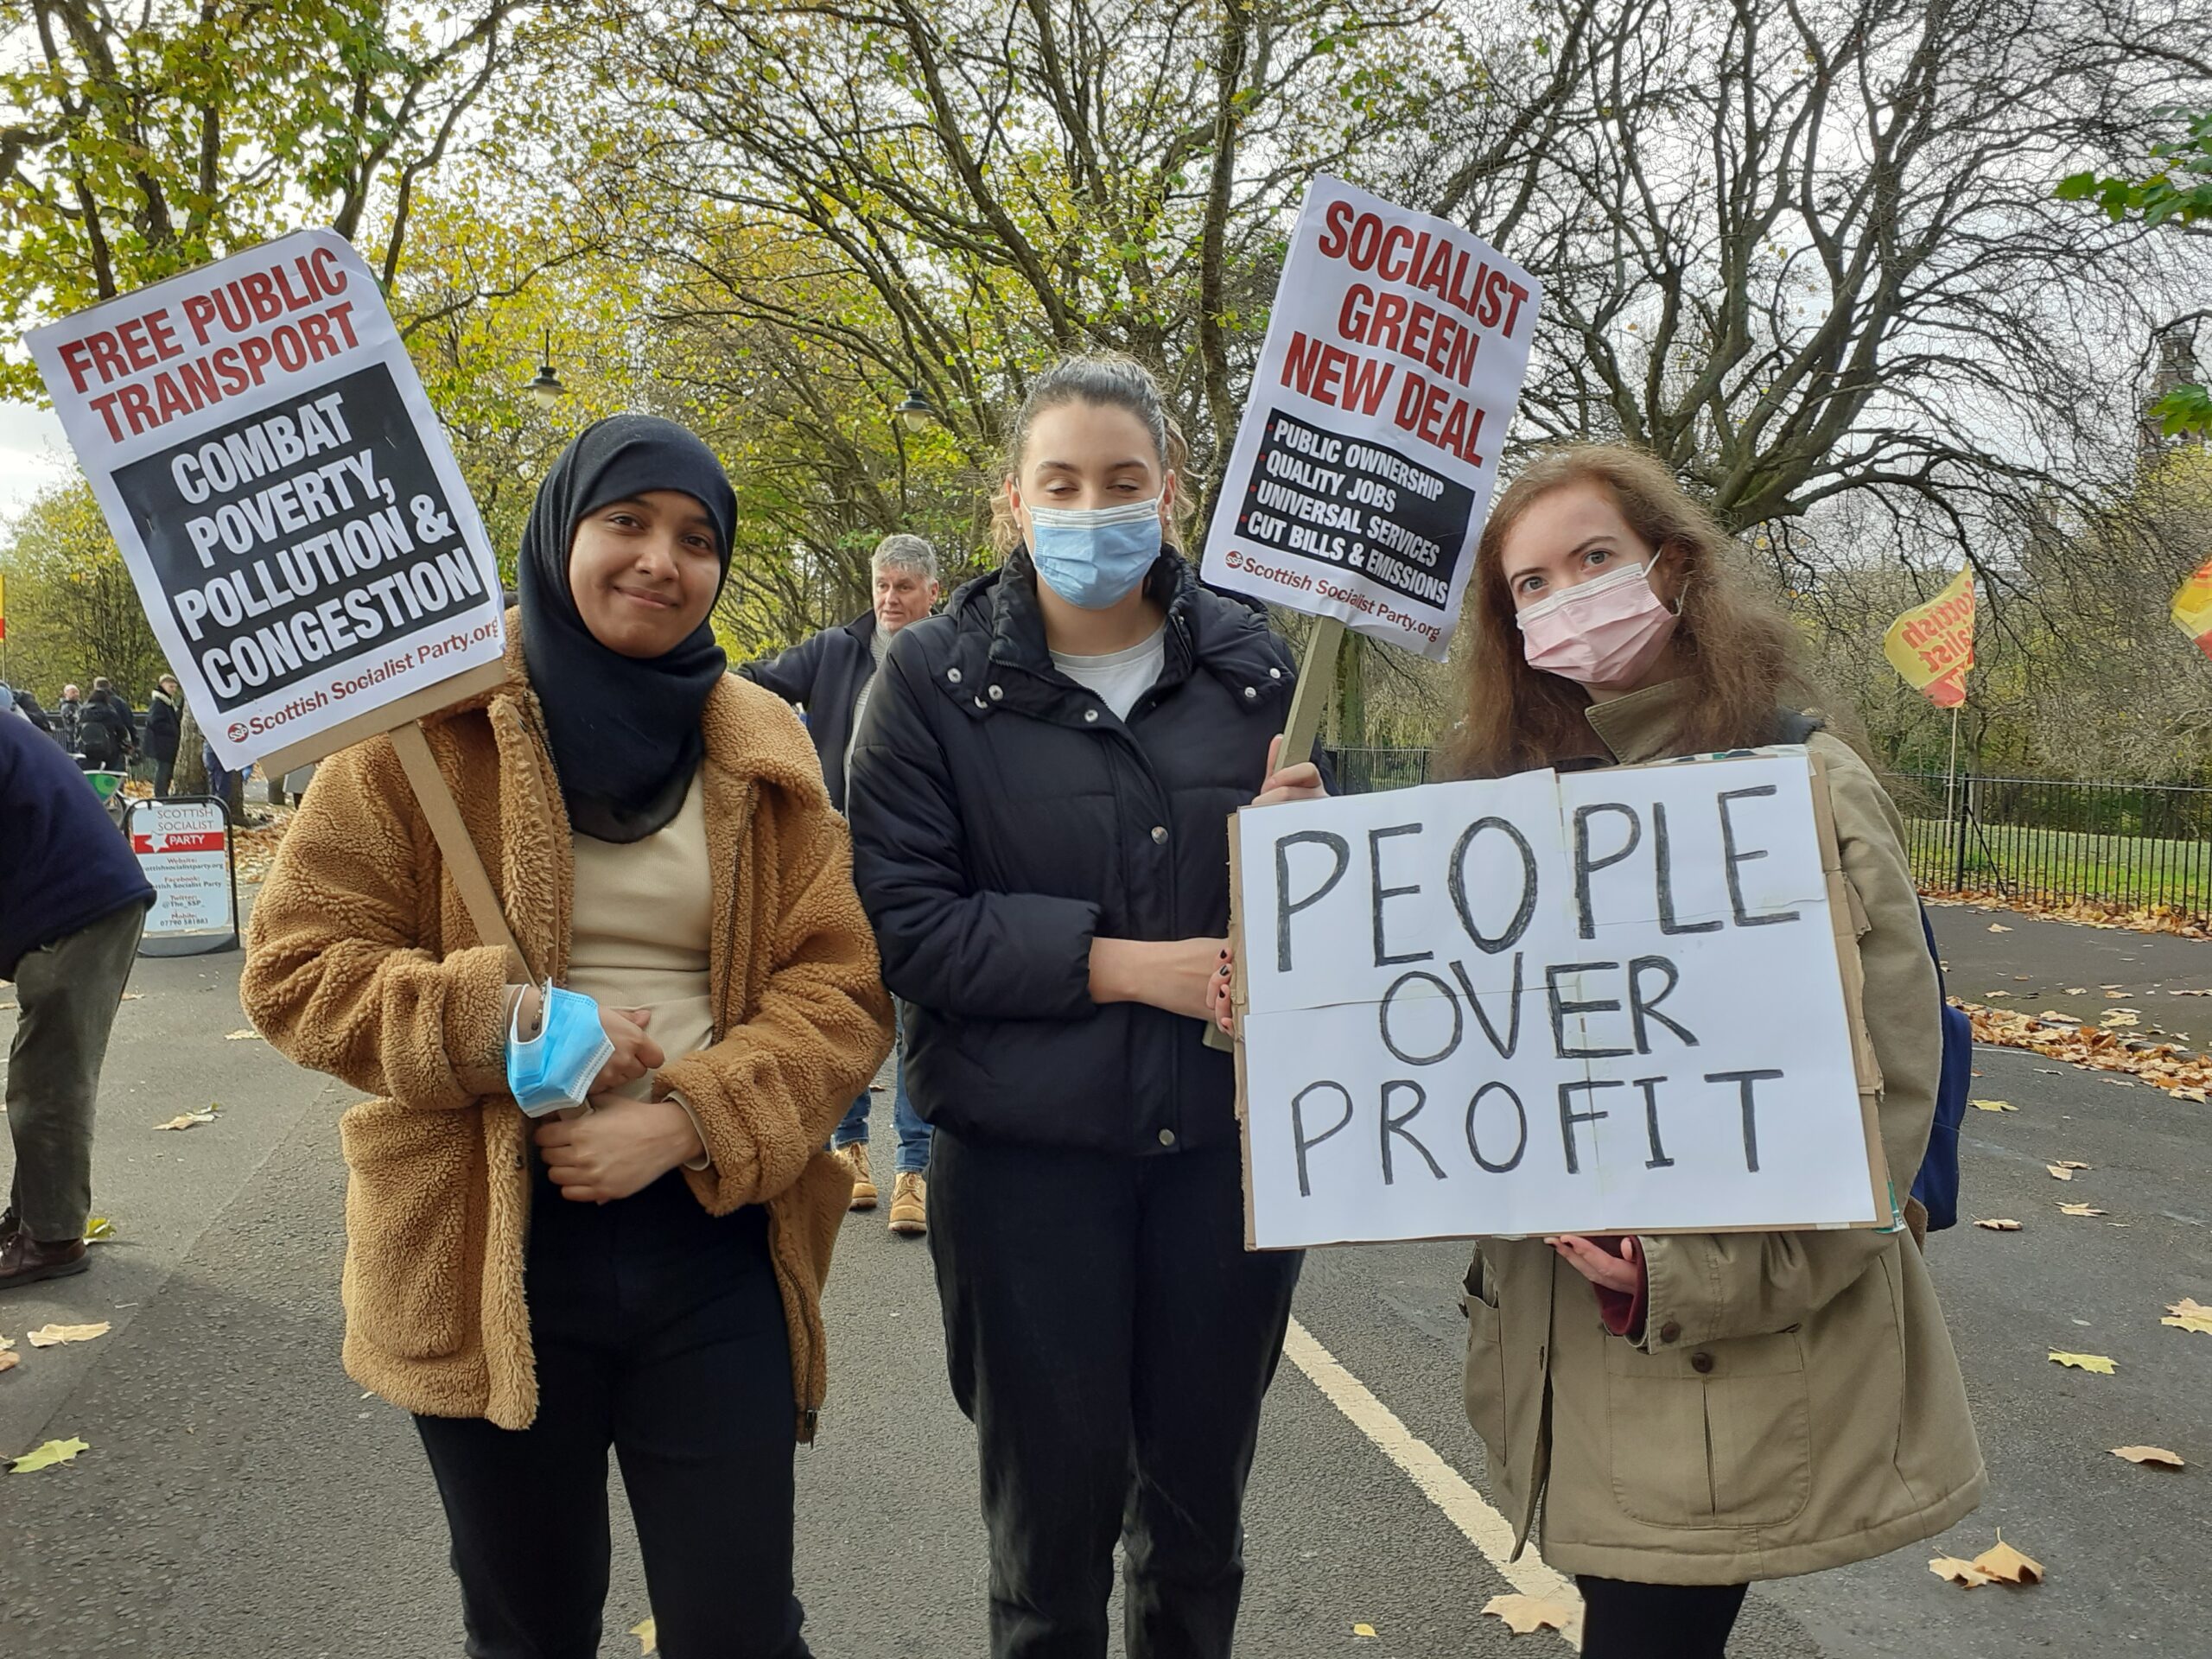 Three young women at COP26 with SSP placards reading, "Free public transport", "socialist green new deal", and "people over profit"